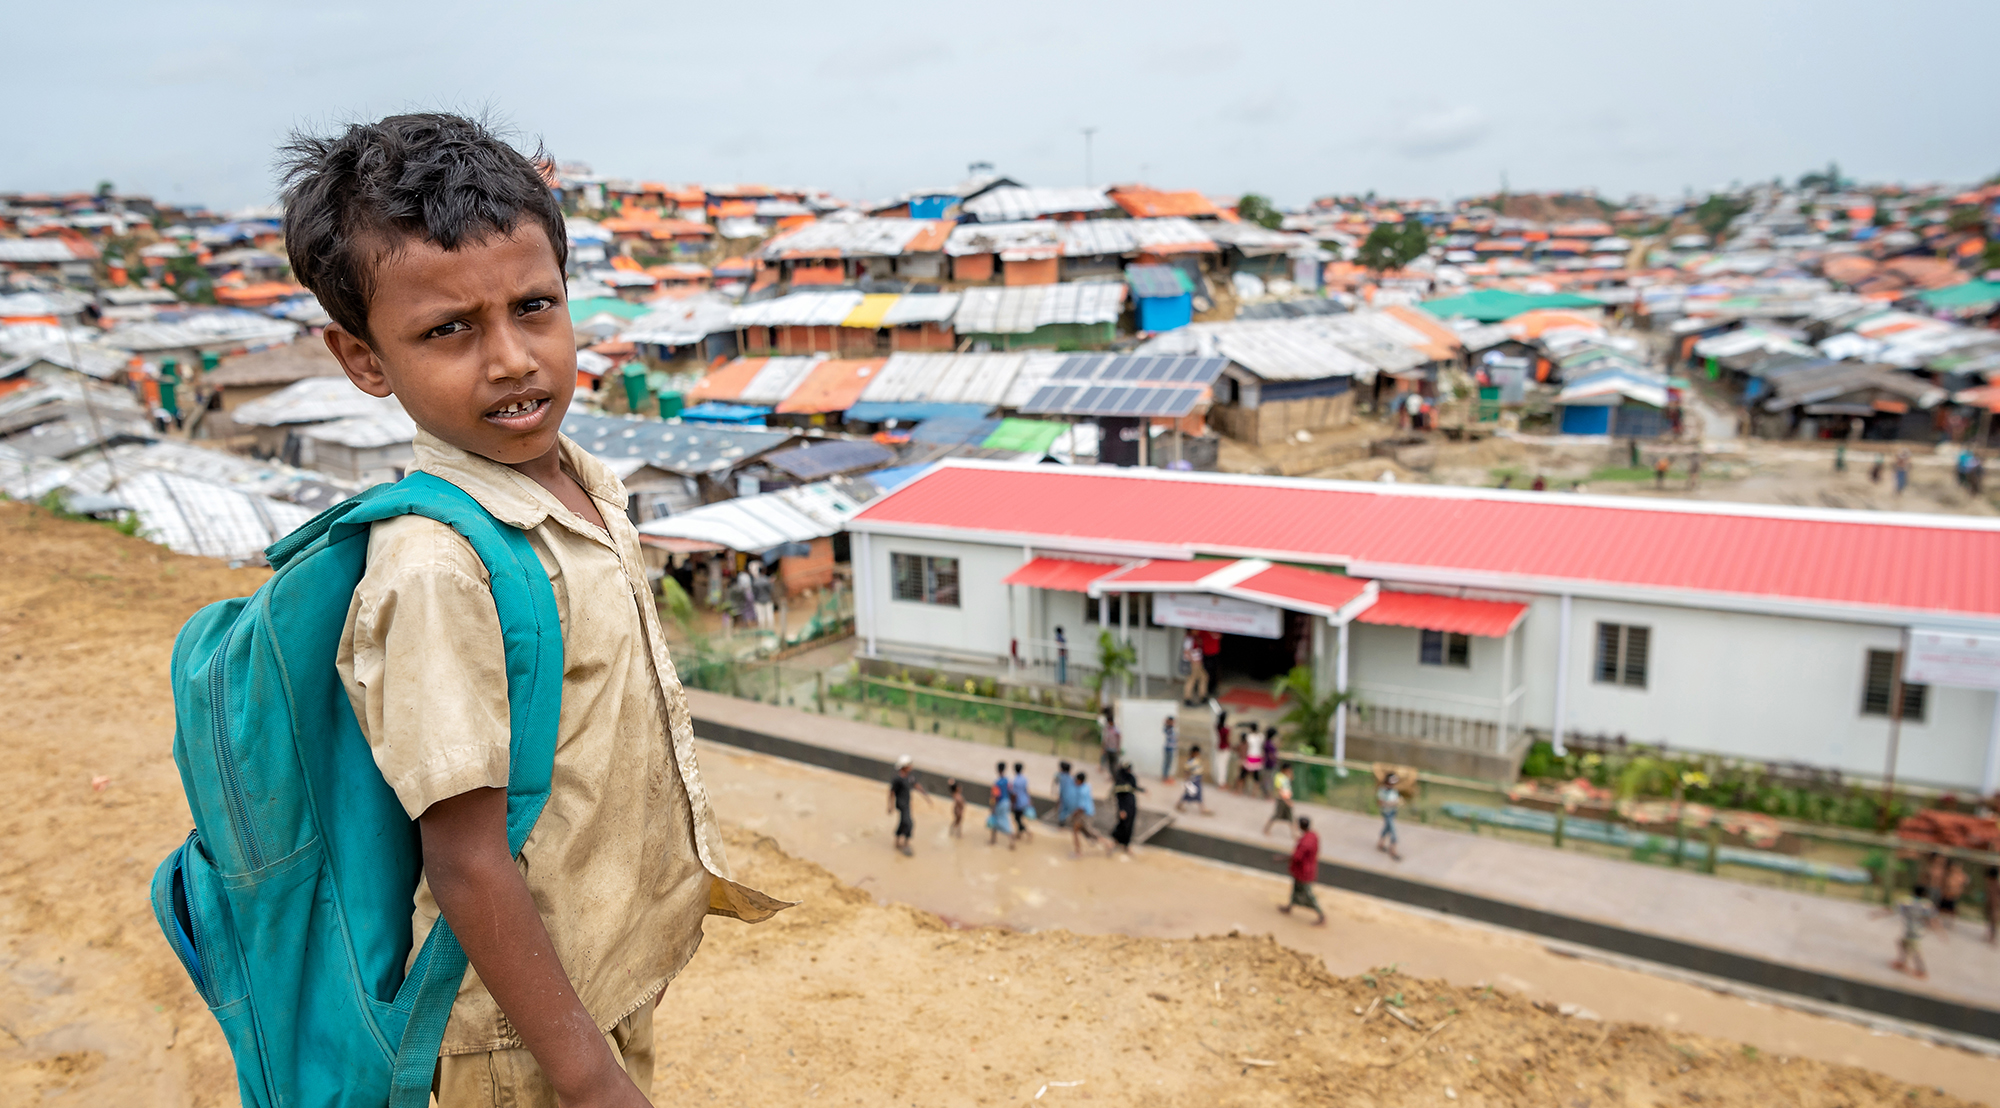 The refugee camp in Bangladesh – two years after displacement